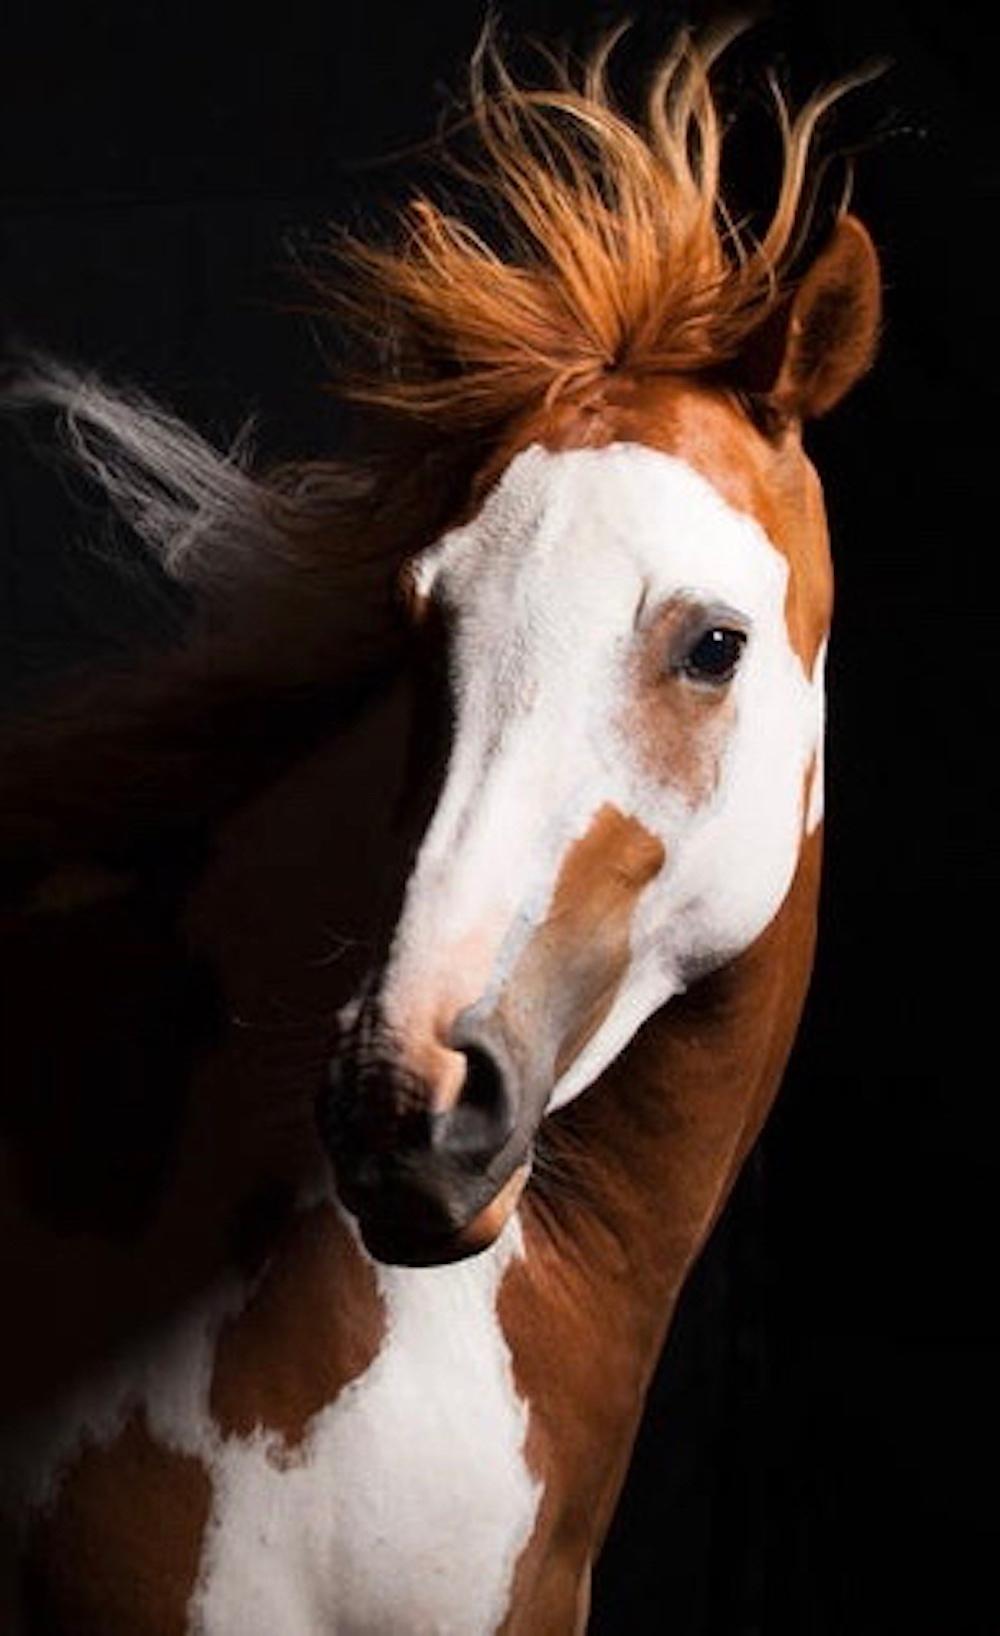 The magnificent, horse portrait by photographer Lisa Houlgrave, features Lili, the two year old daughter of RJ Masterbug in Viggo Mortensen's film, Hidalgo.
